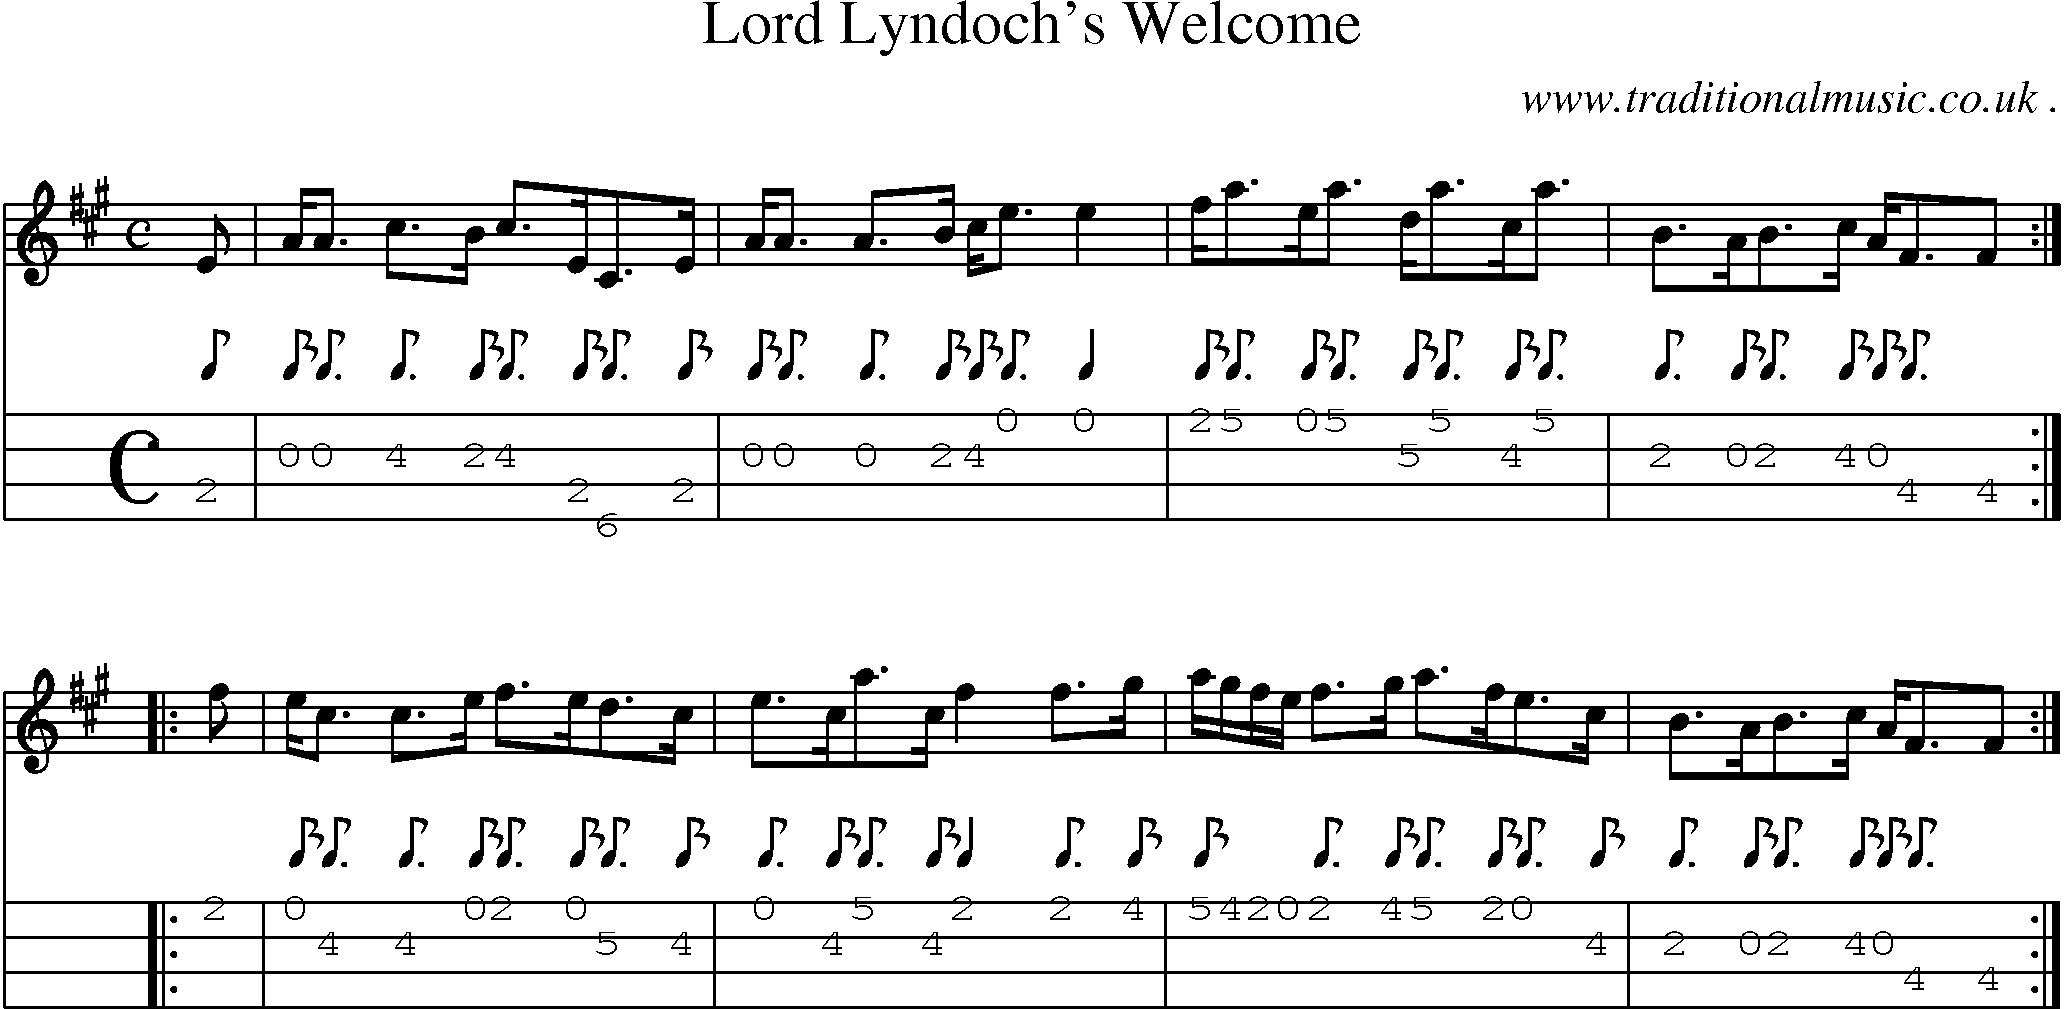 Sheet-music  score, Chords and Mandolin Tabs for Lord Lyndochs Welcome